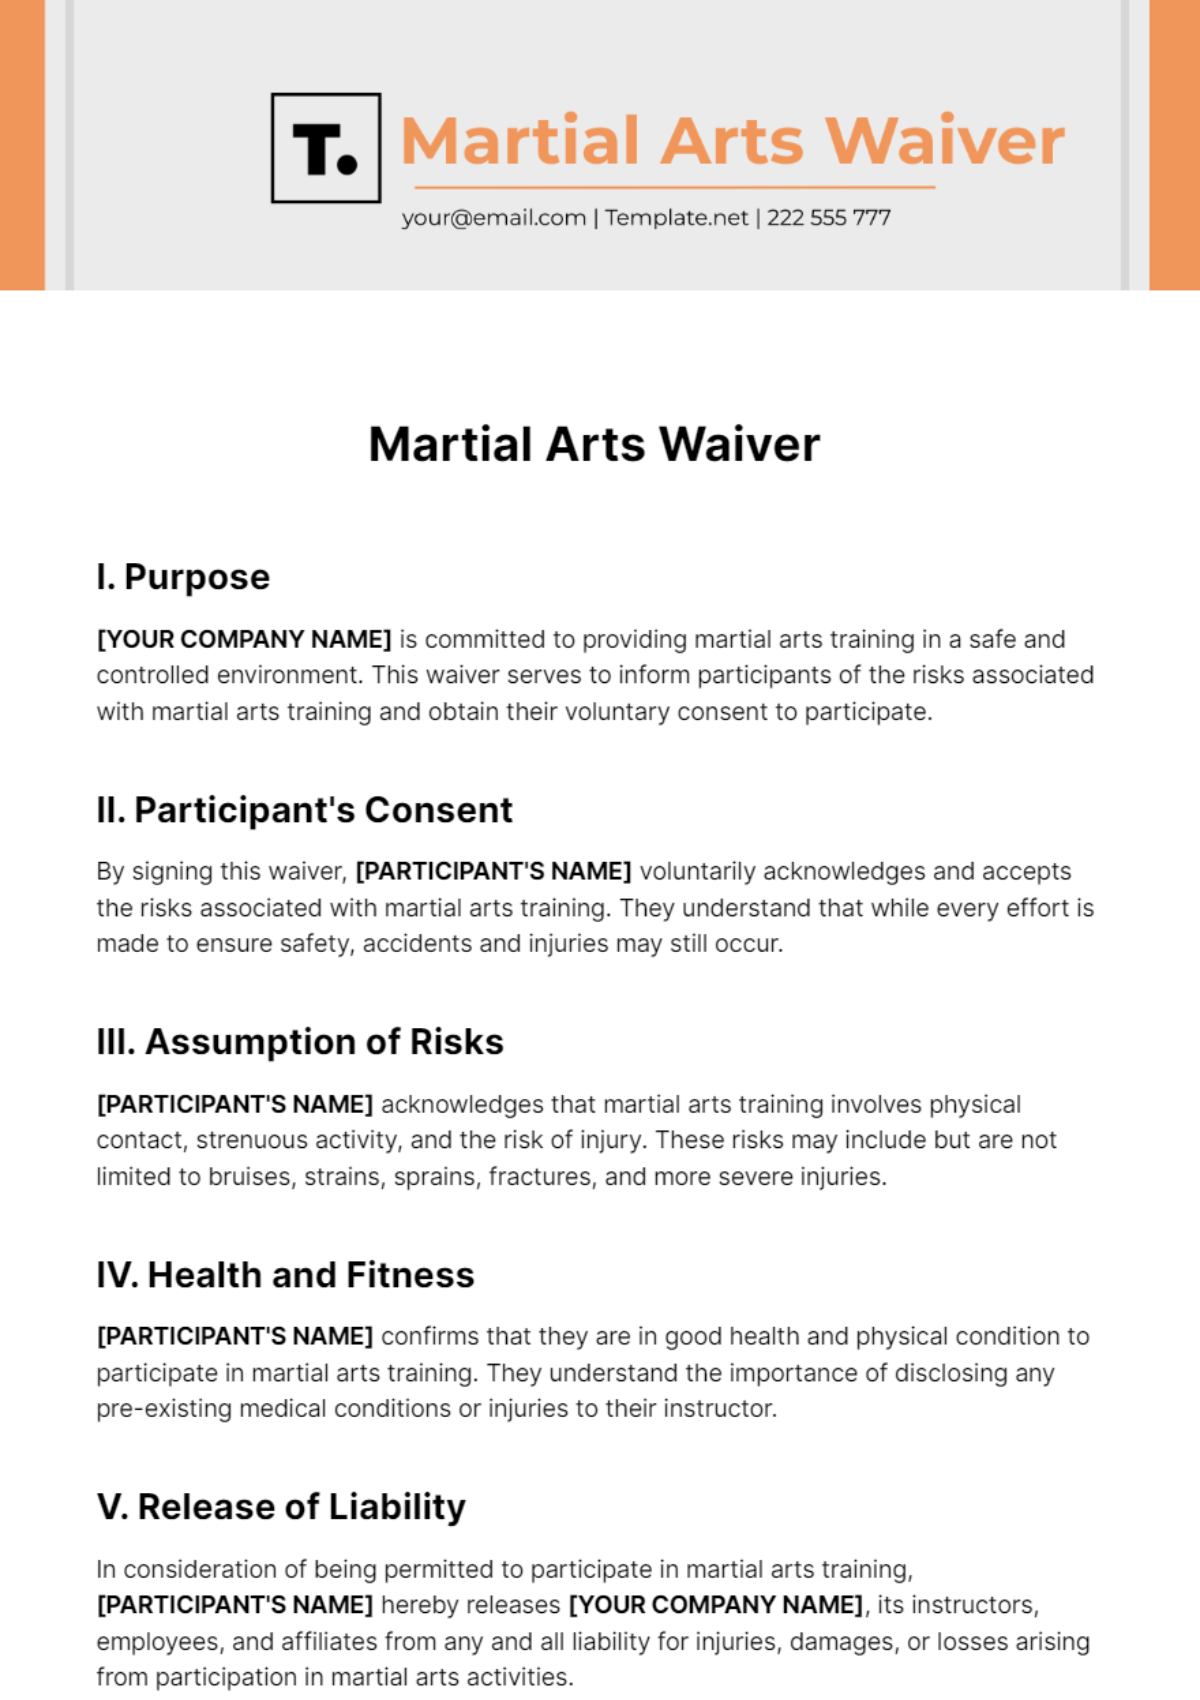 Martial Arts Waiver Template